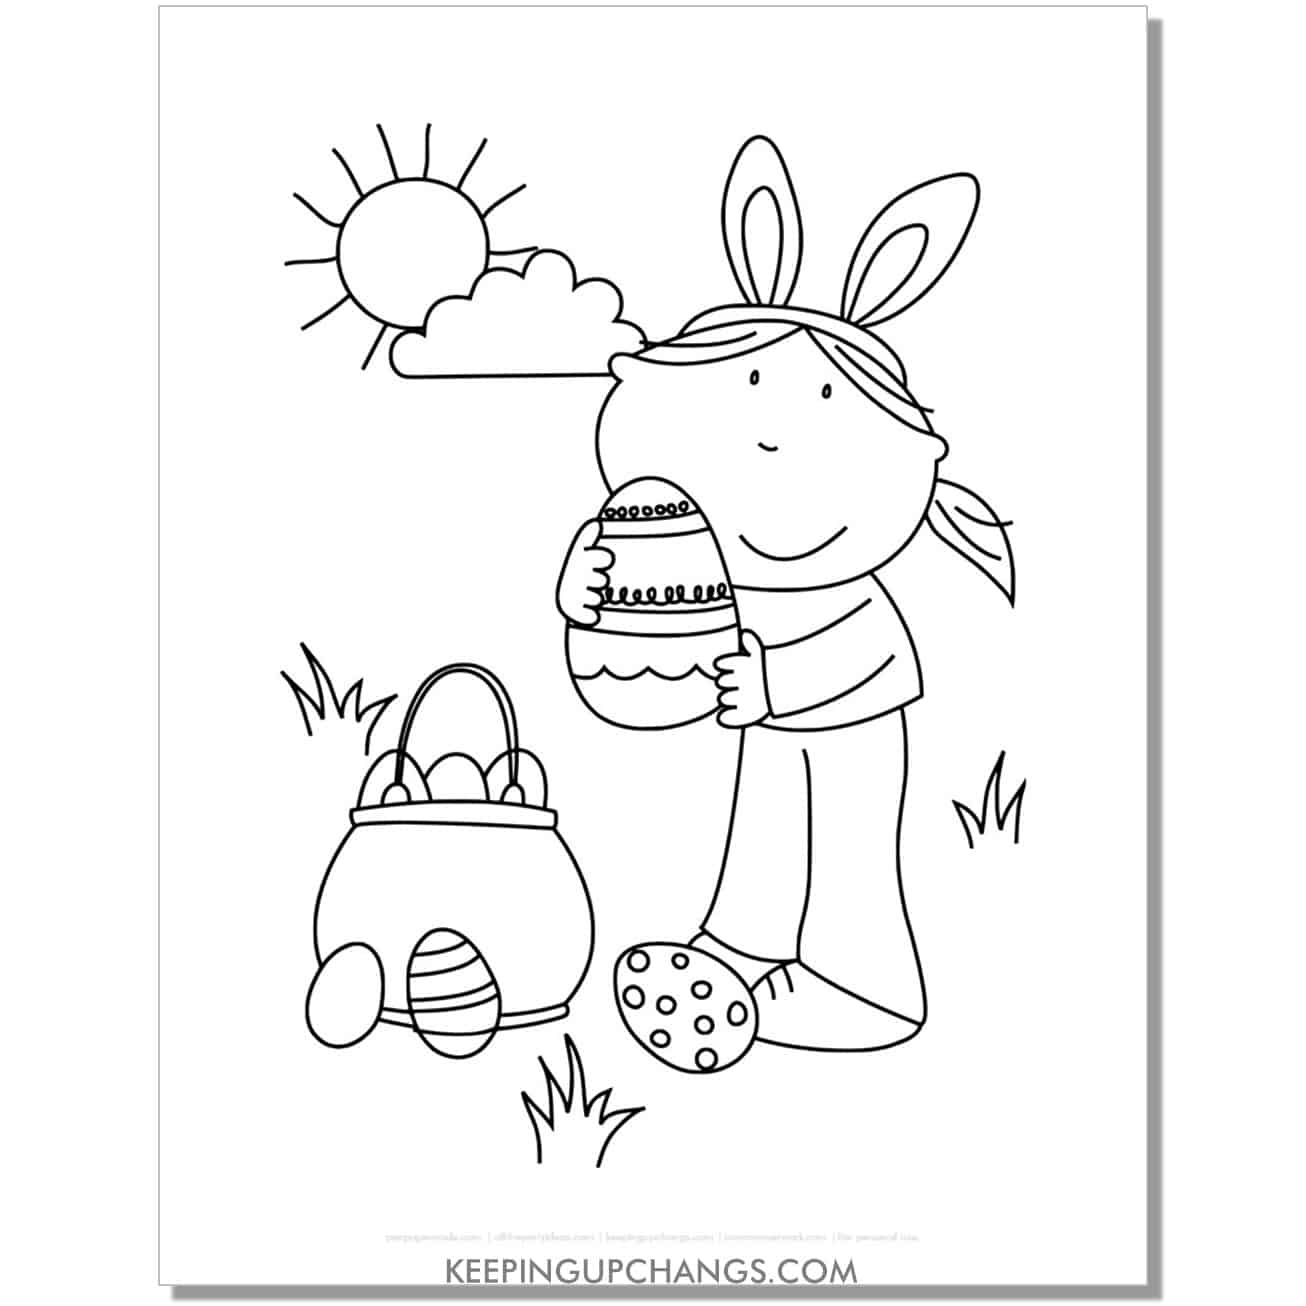 girl with bunny ears on easter egg hunt coloring page, sheet.